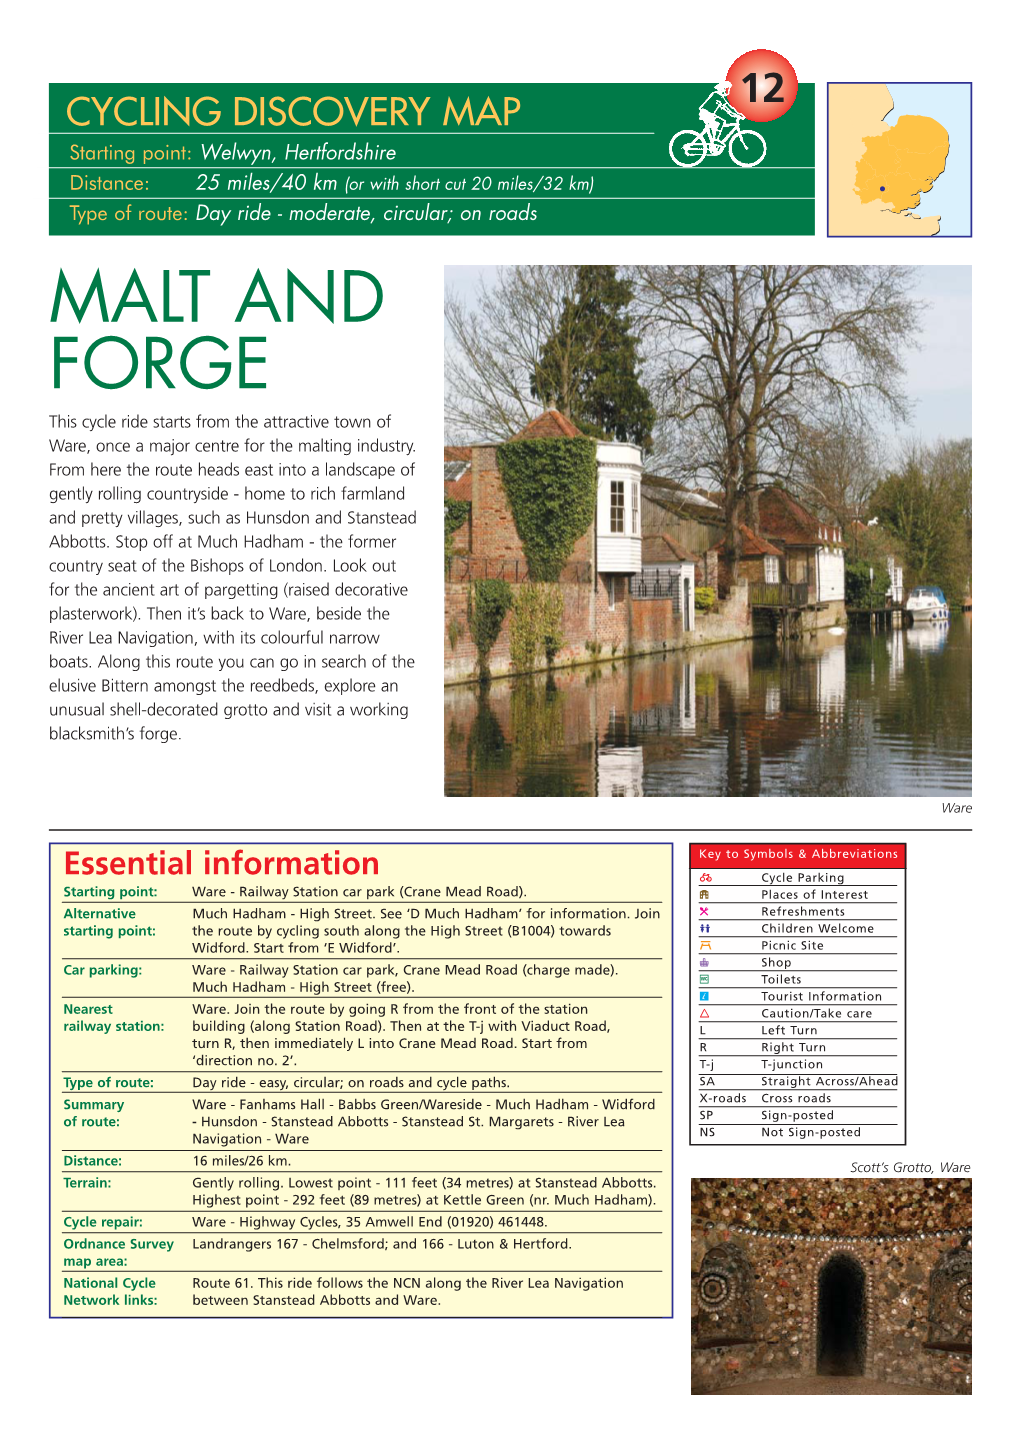 MALT and FORGE This Cycle Ride Starts from the Attractive Town of Ware, Once a Major Centre for the Malting Industry